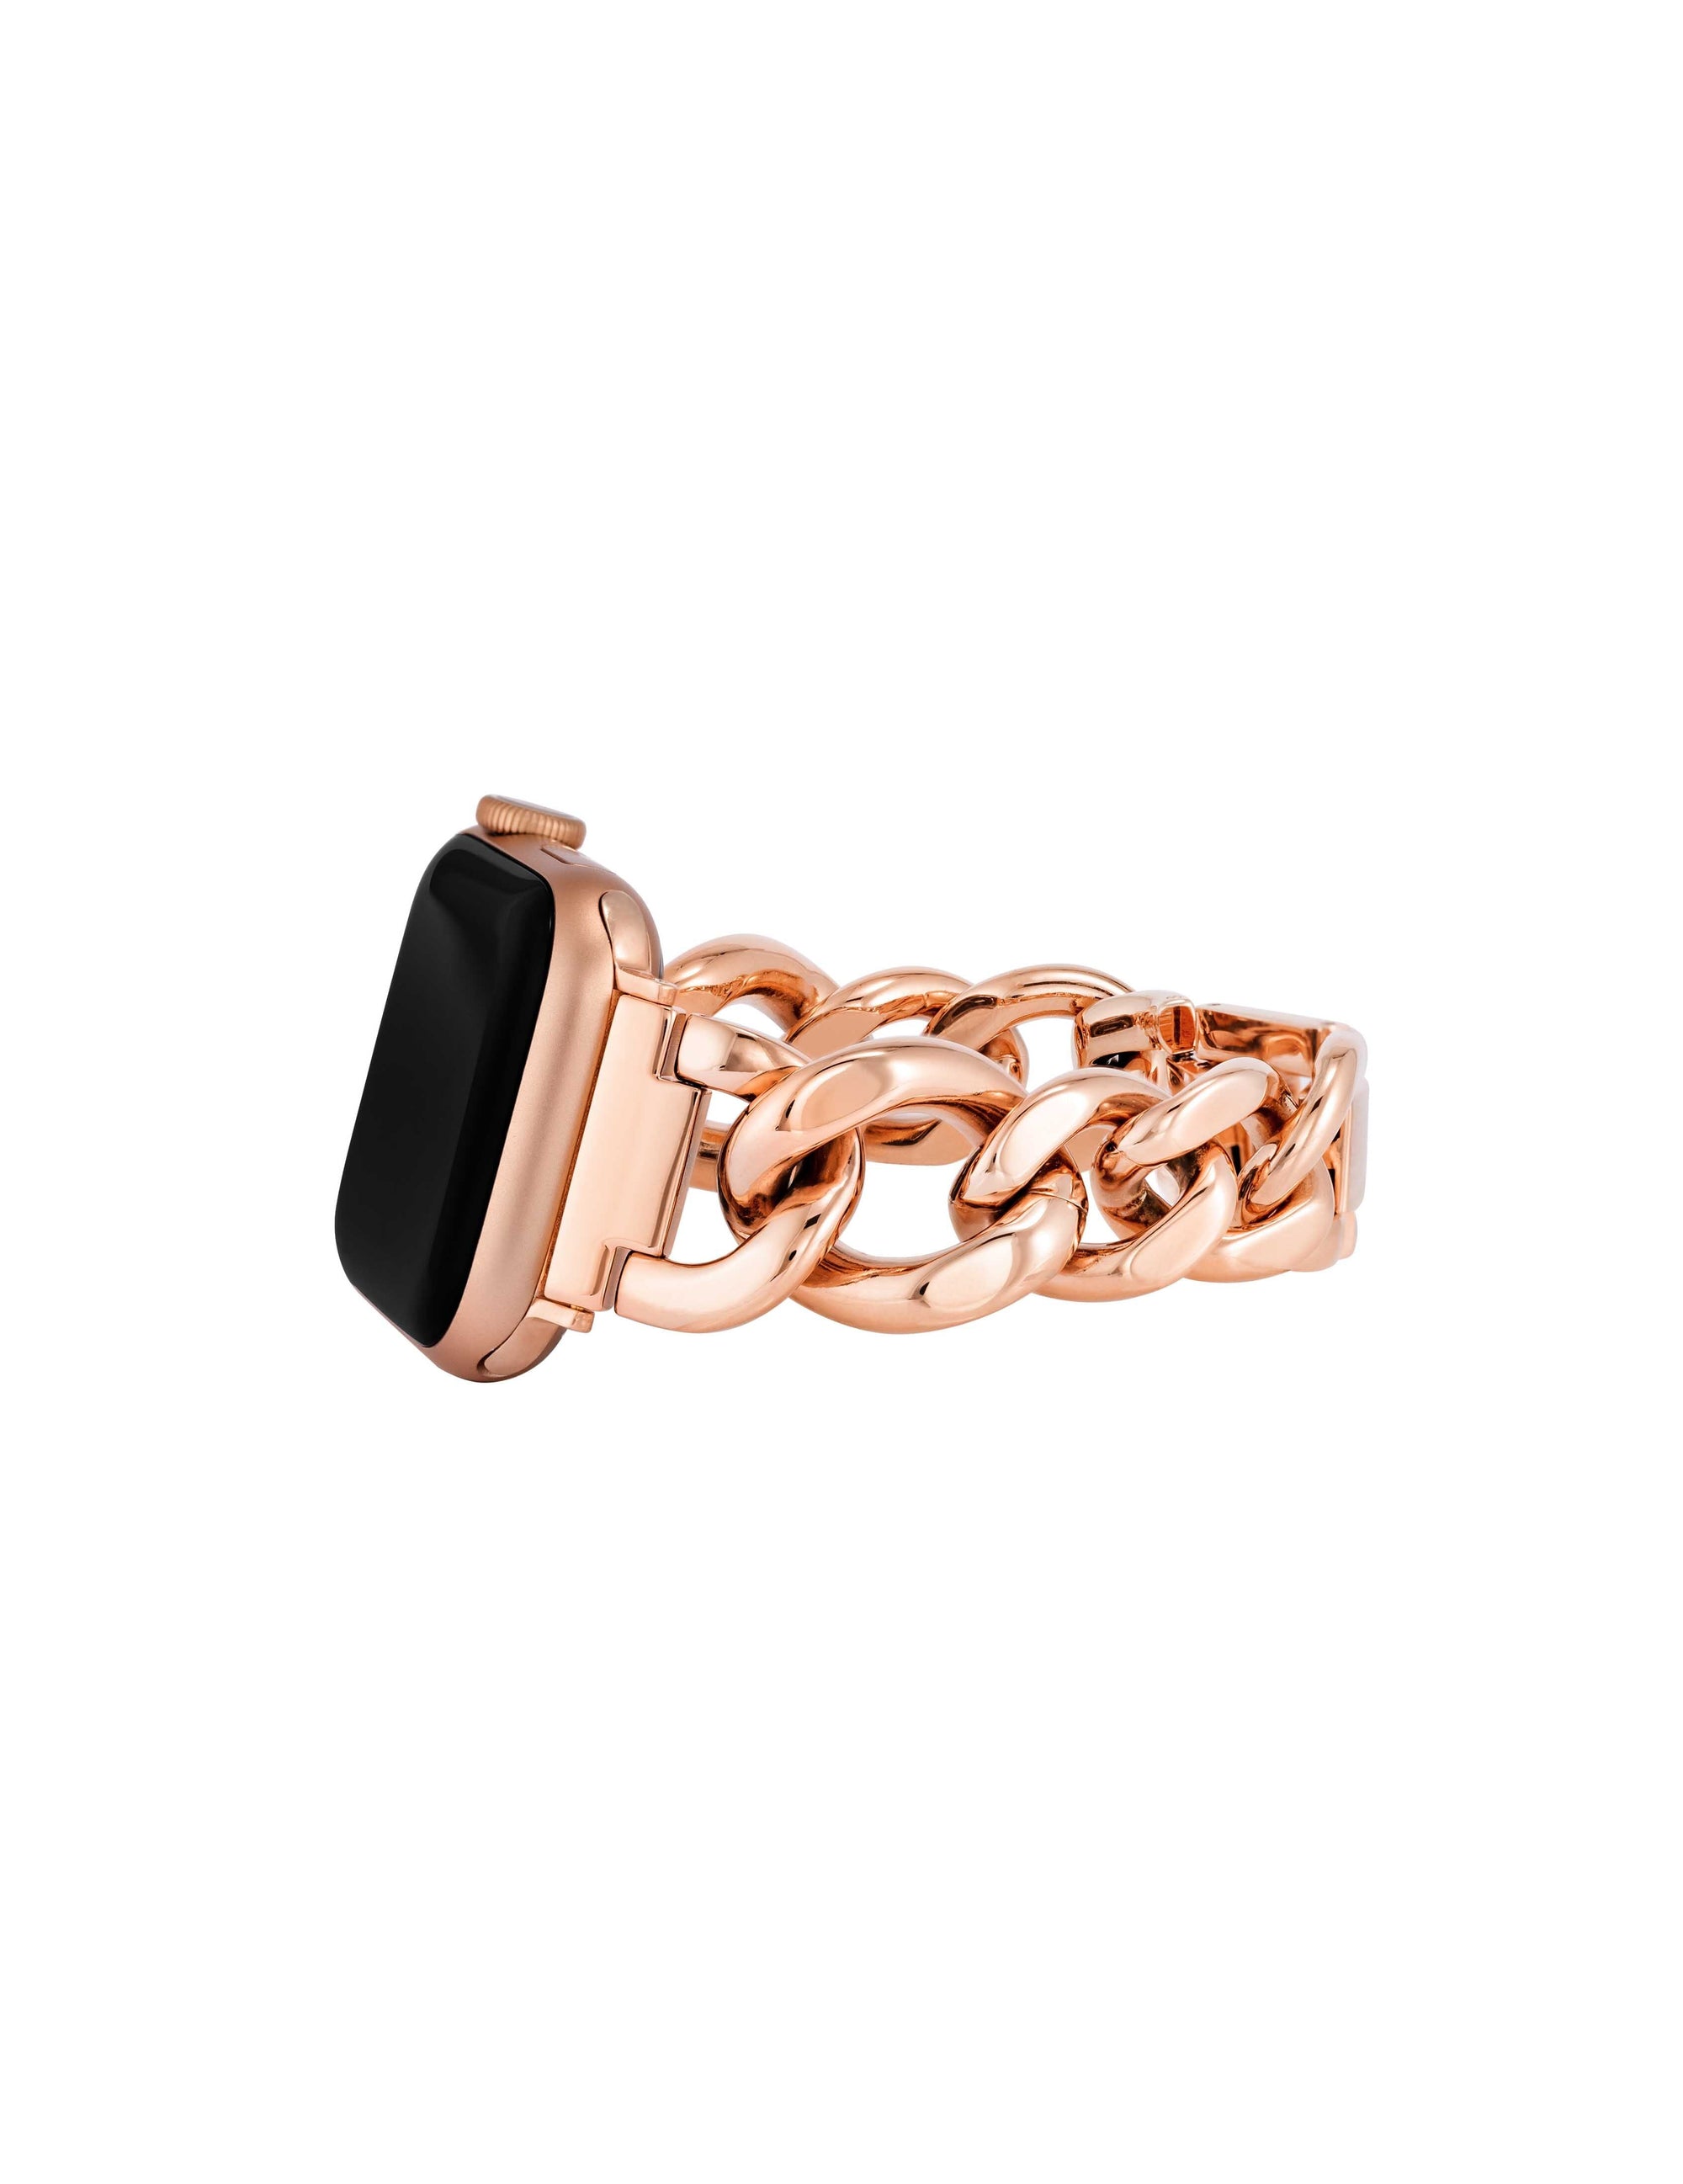 Rose Gold Biography Chain Necklace Extender